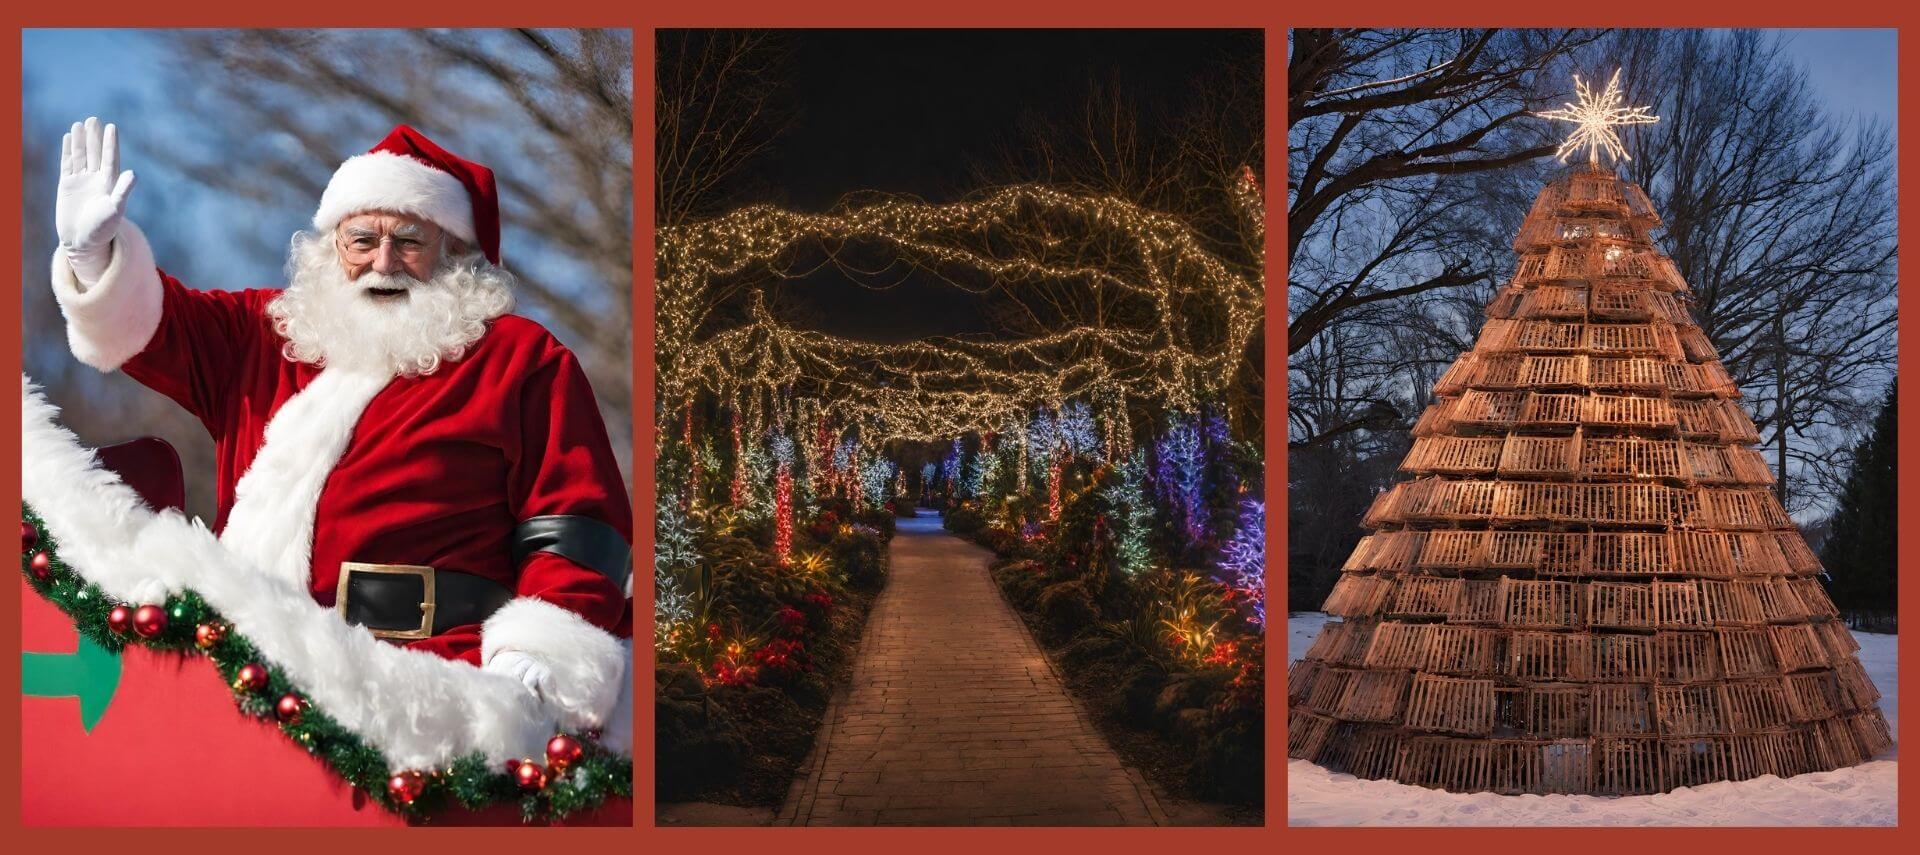 A collage of Santa, botanical gardens lit up, and a lobster trap Christmas tree